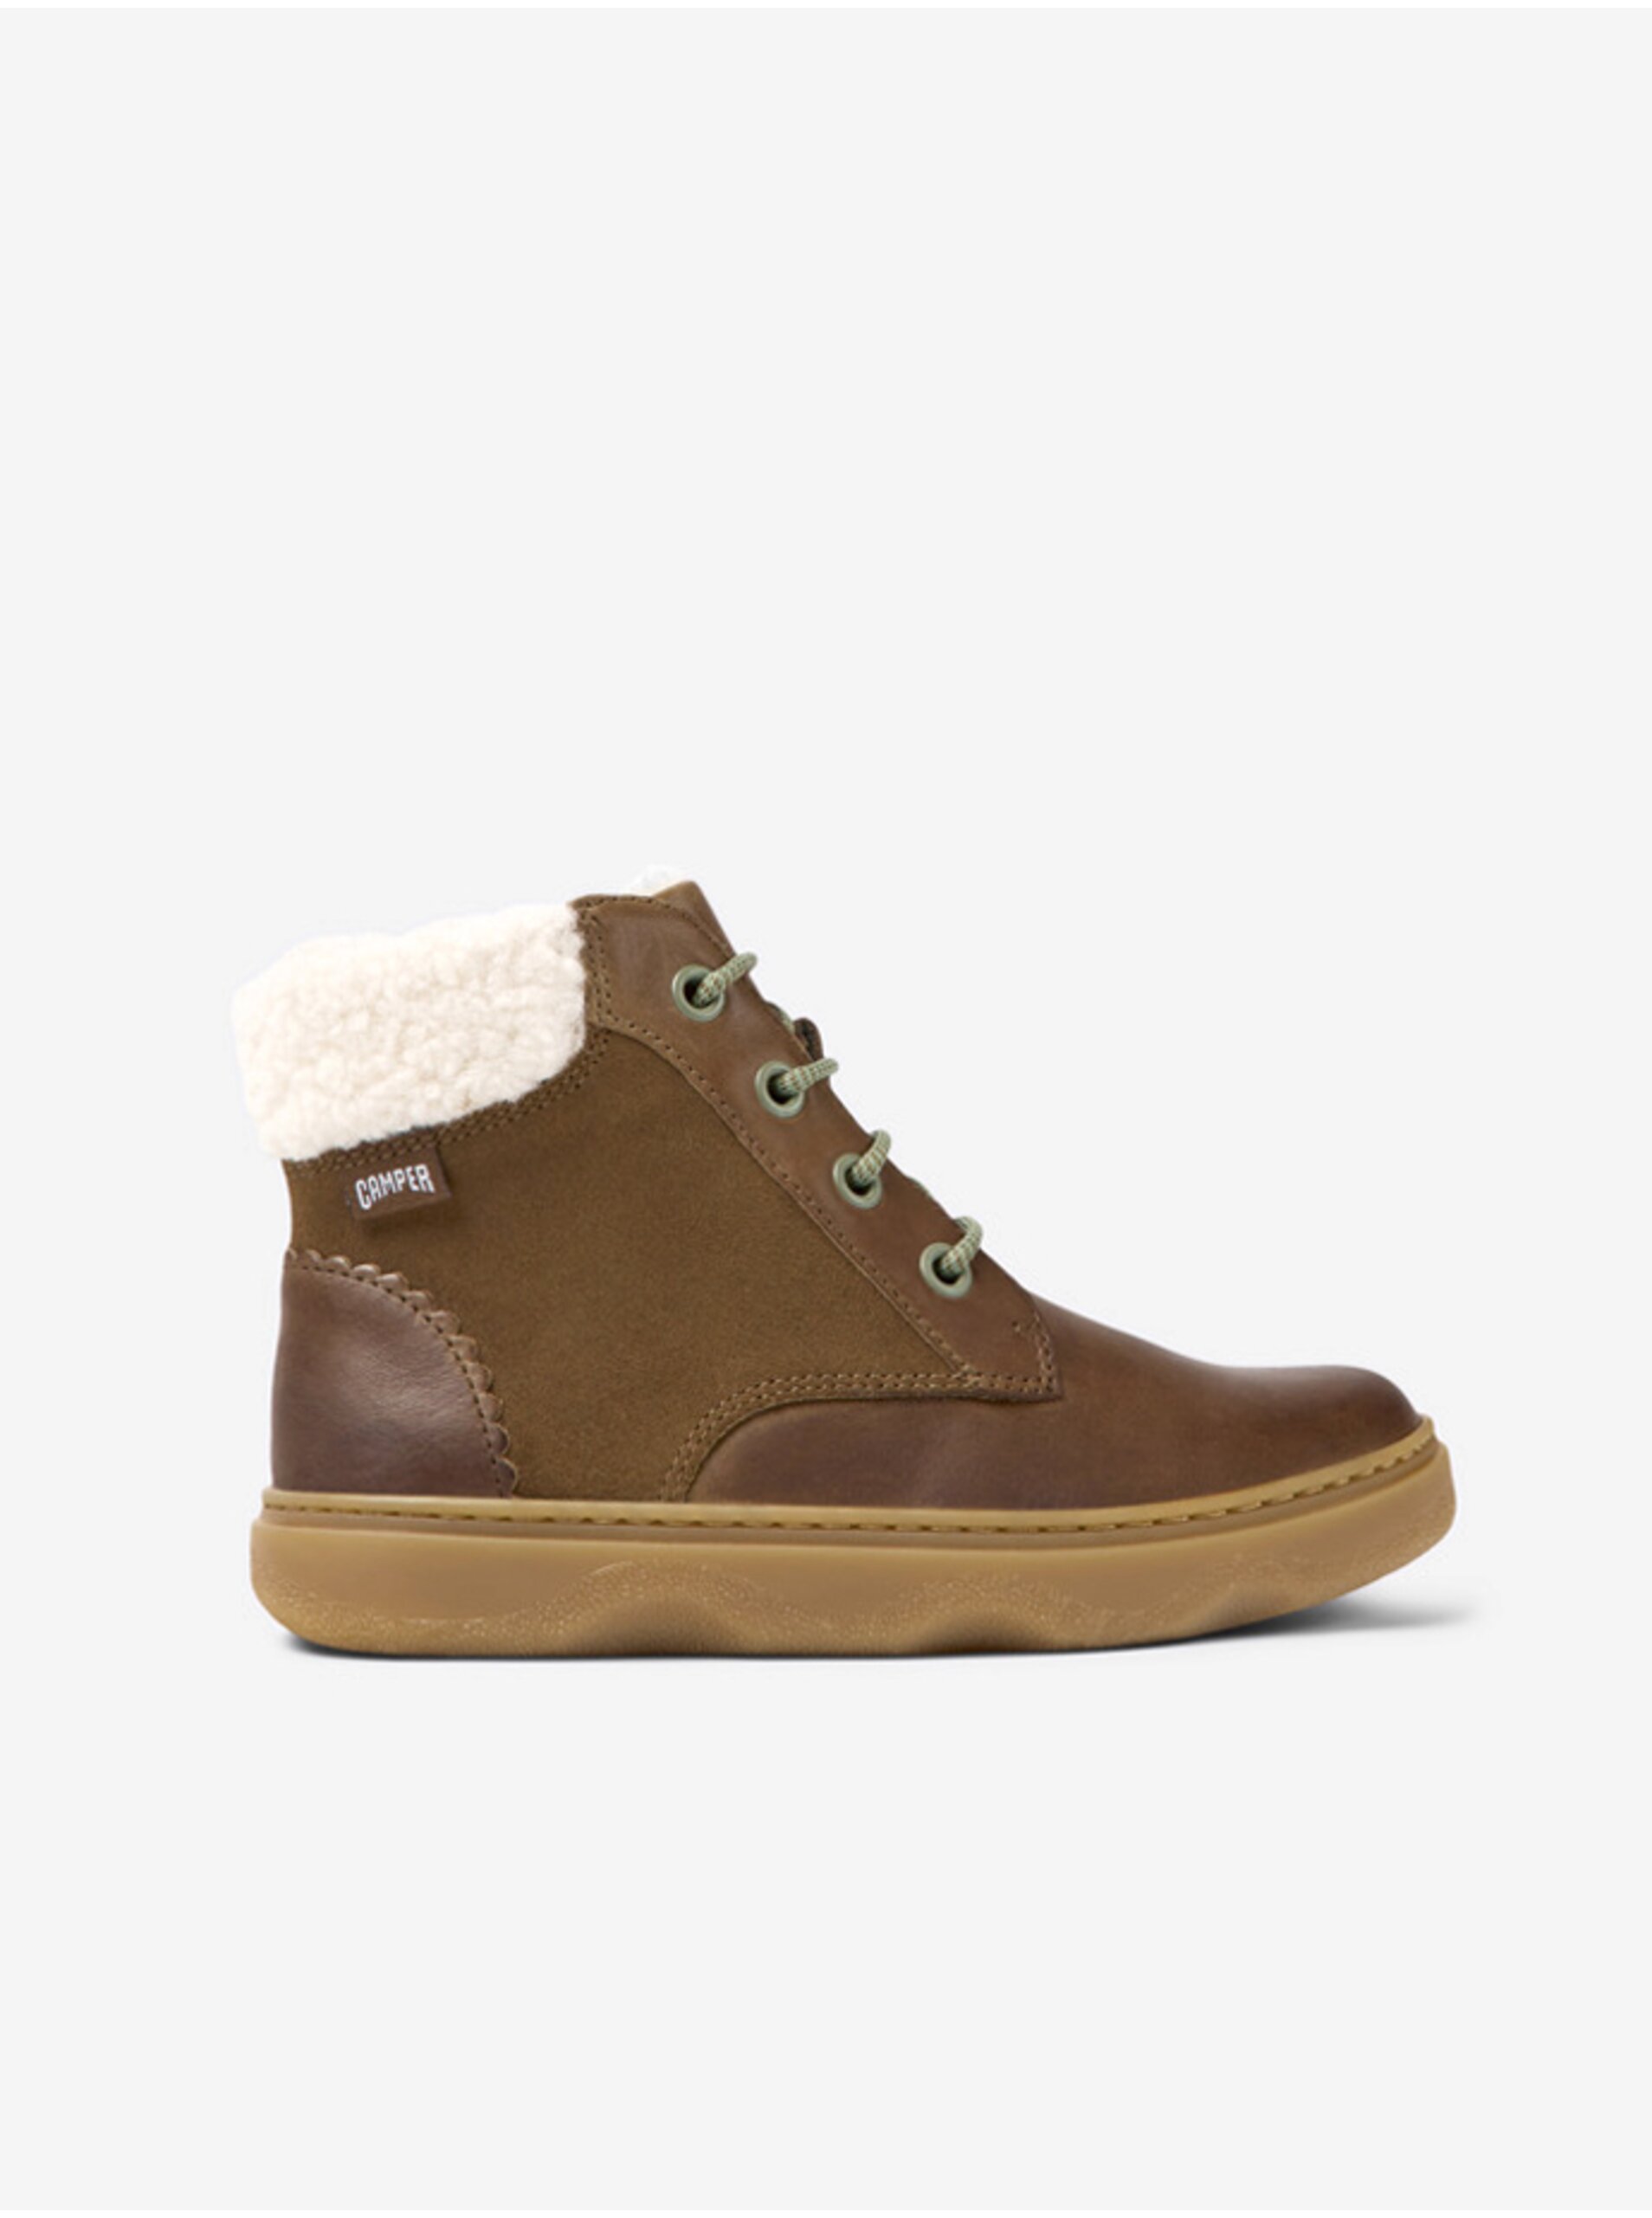 Brown Girls' Winter Leather Ankle Boots Camper Kido - Girls